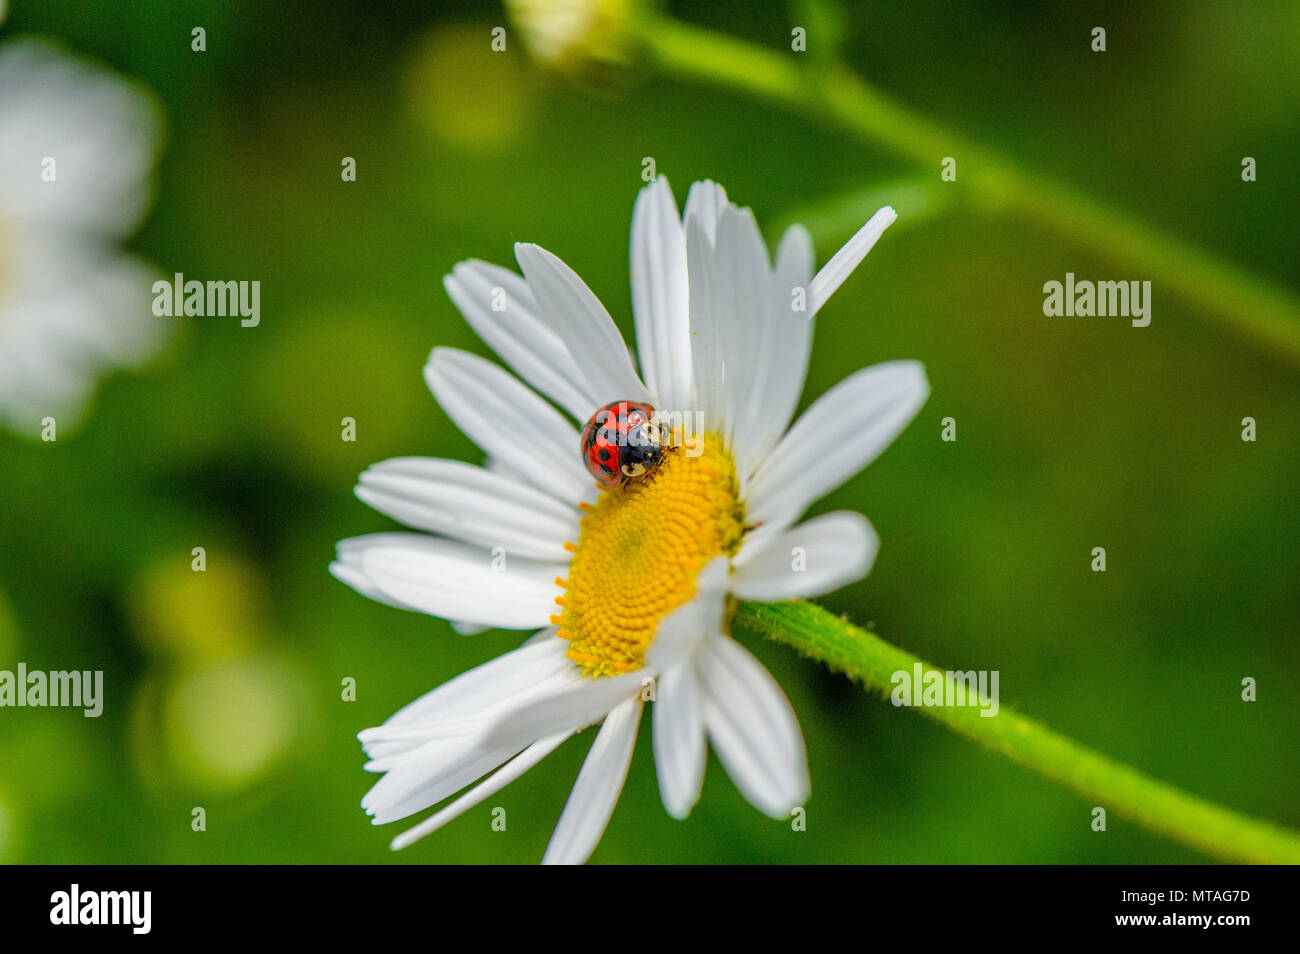 Harlequin Ladybird consuming pollen from a Oxeye daisy flower. Stock Photo